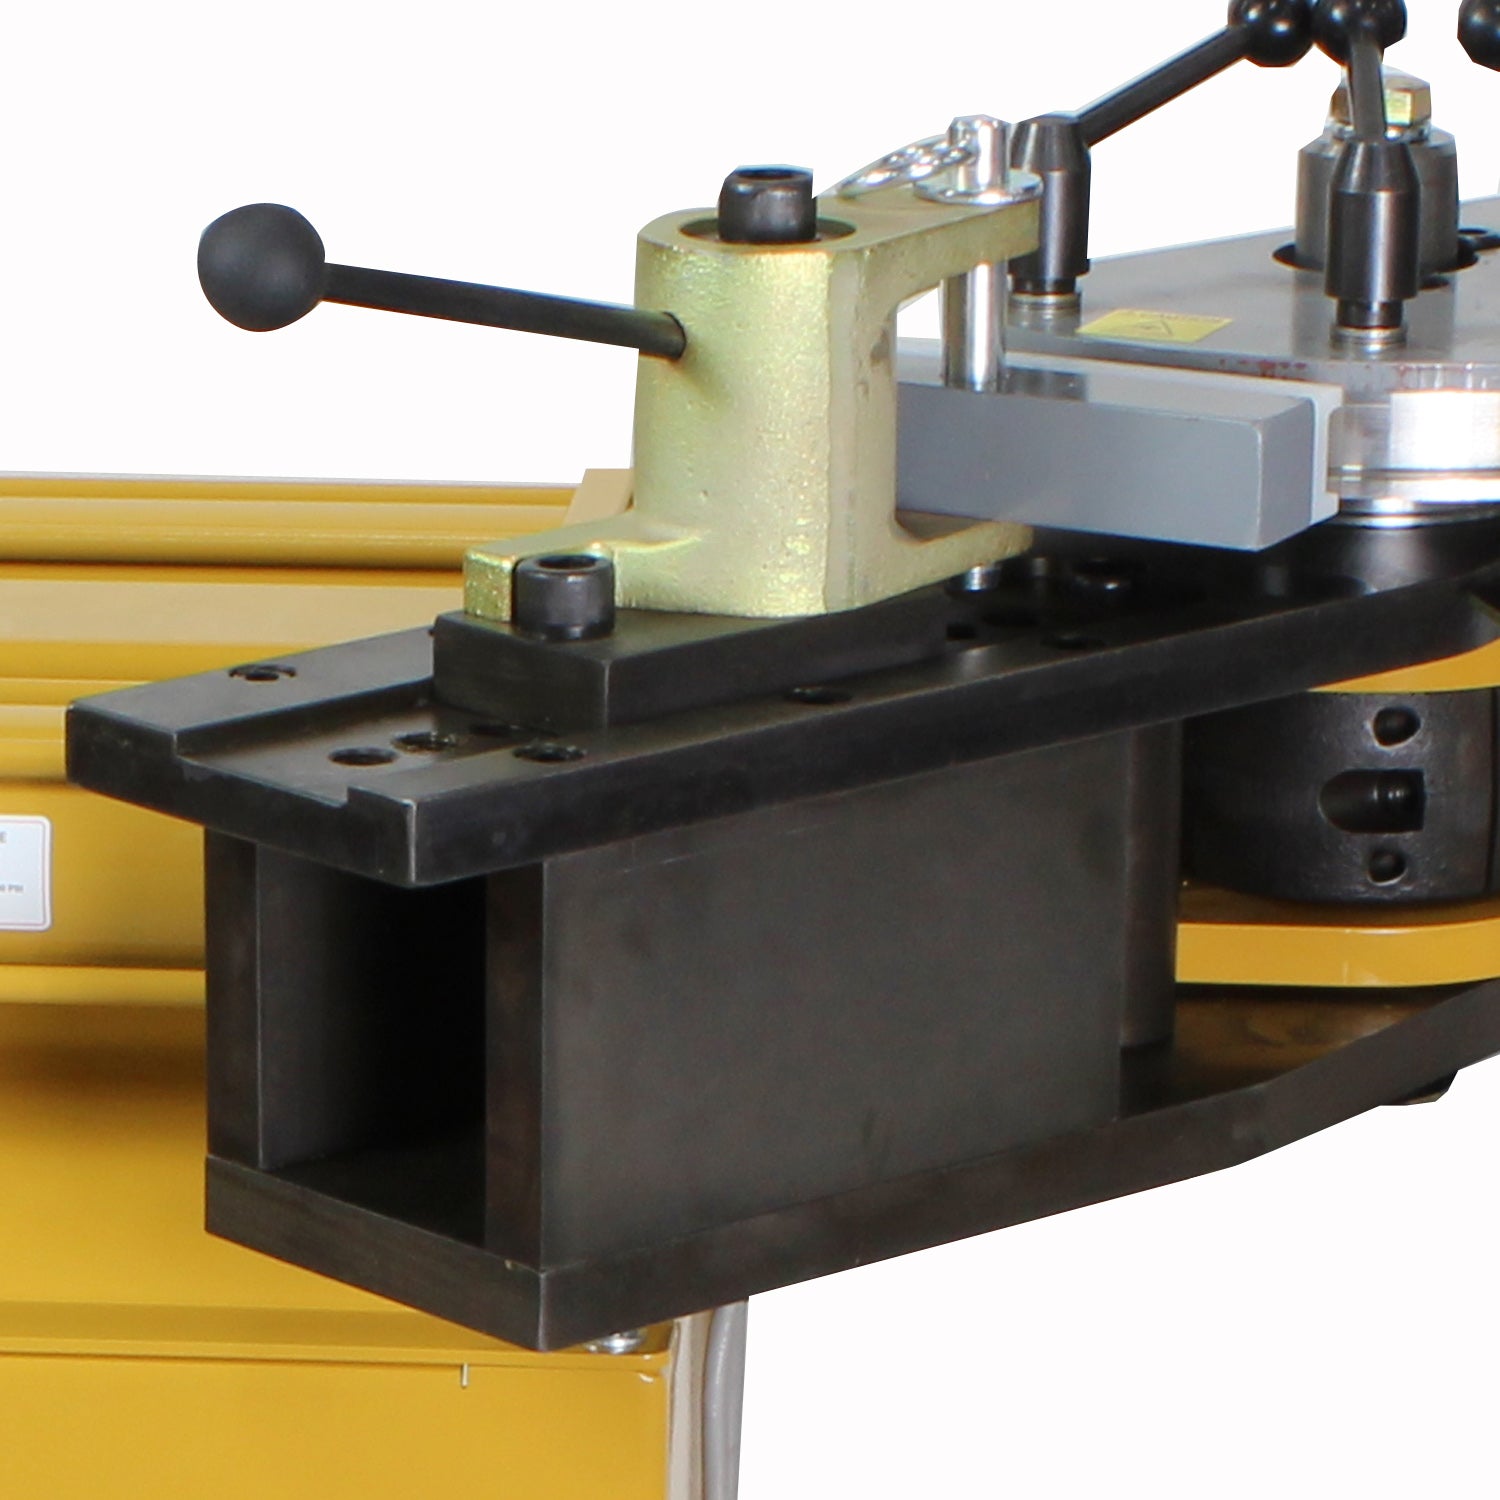 Baileigh RDB-150 110V Hydraulic, Rotary Draw Tube and Pipe Bender 2" Schedule 40 Pipe Capacity, 8" CLR Maximum